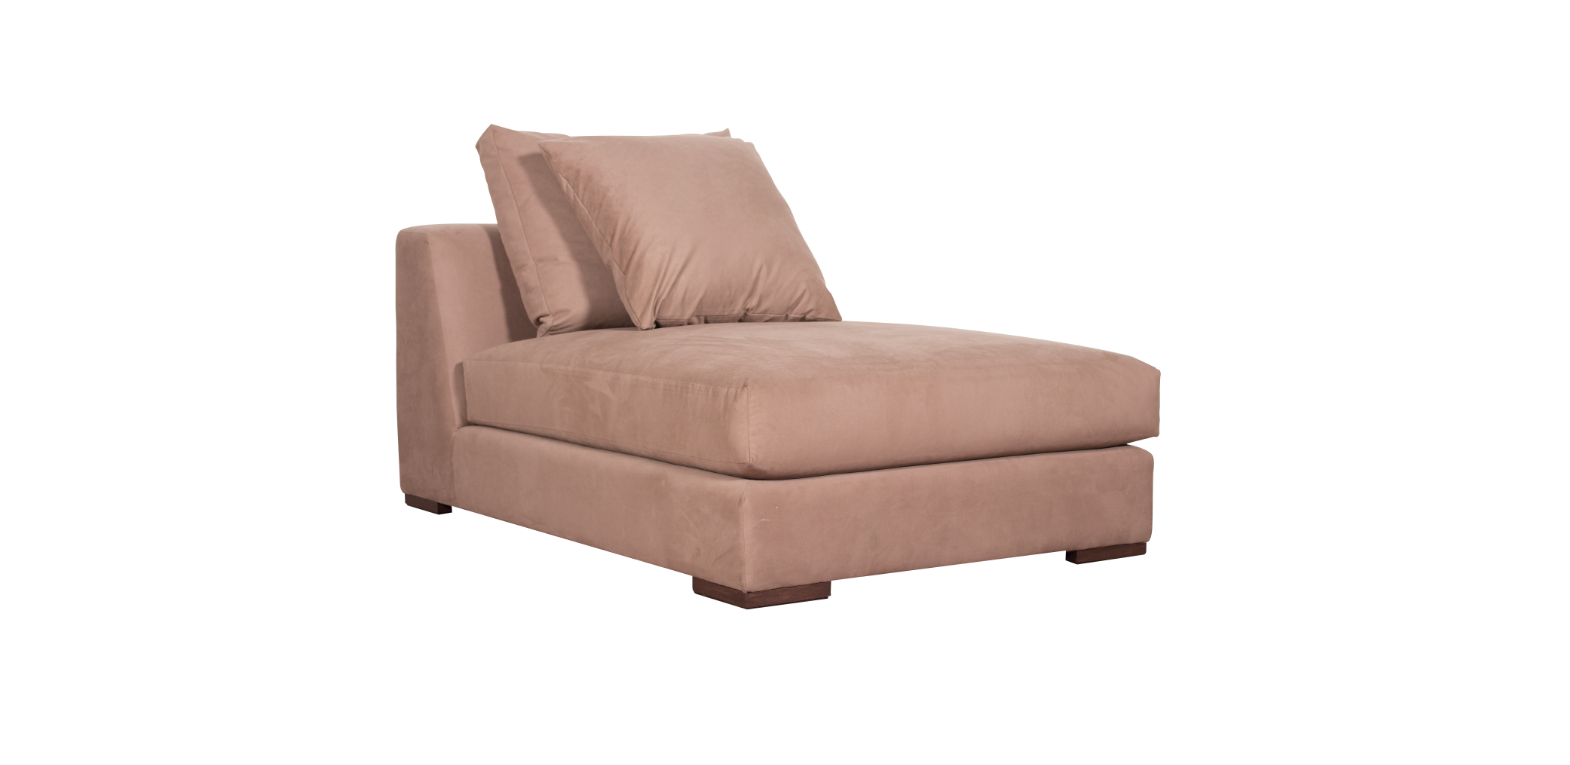 VERONA CHAISE LONGUE WITH NO ARMS